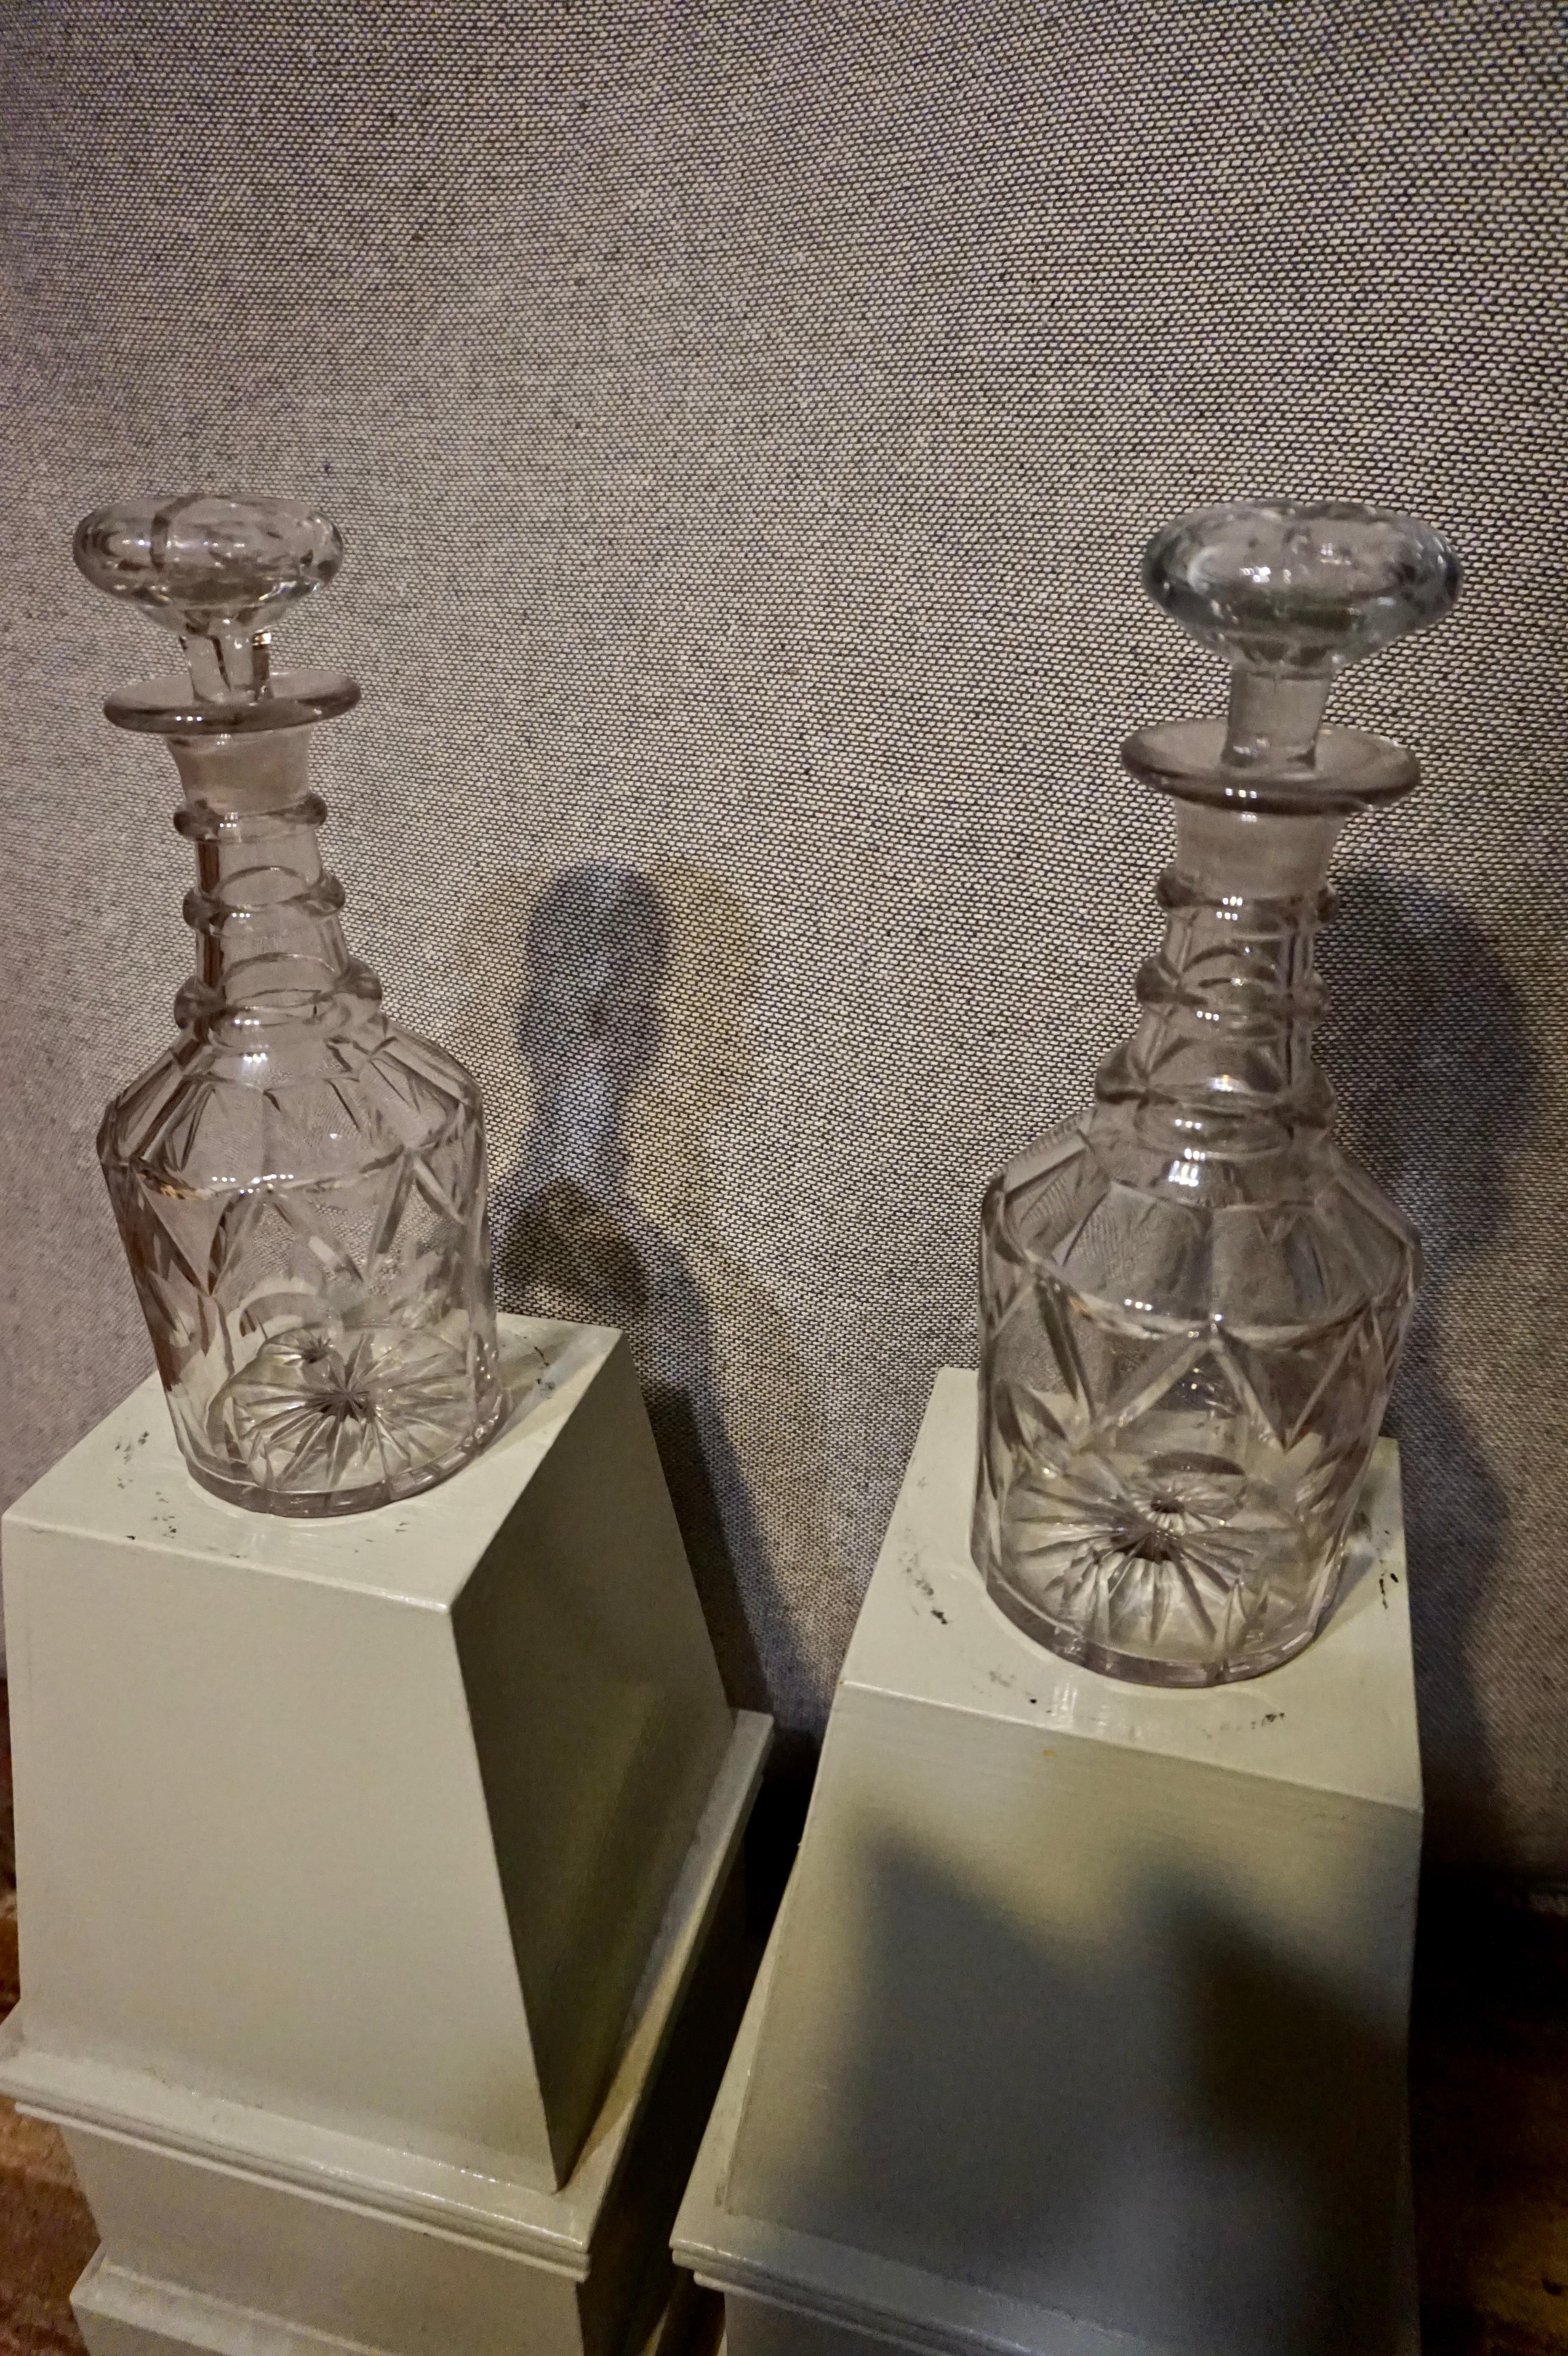 Fine 3 ringed decanters in good condition with original stoppers, bevelling and pin wheel base pattern. Gravitas!